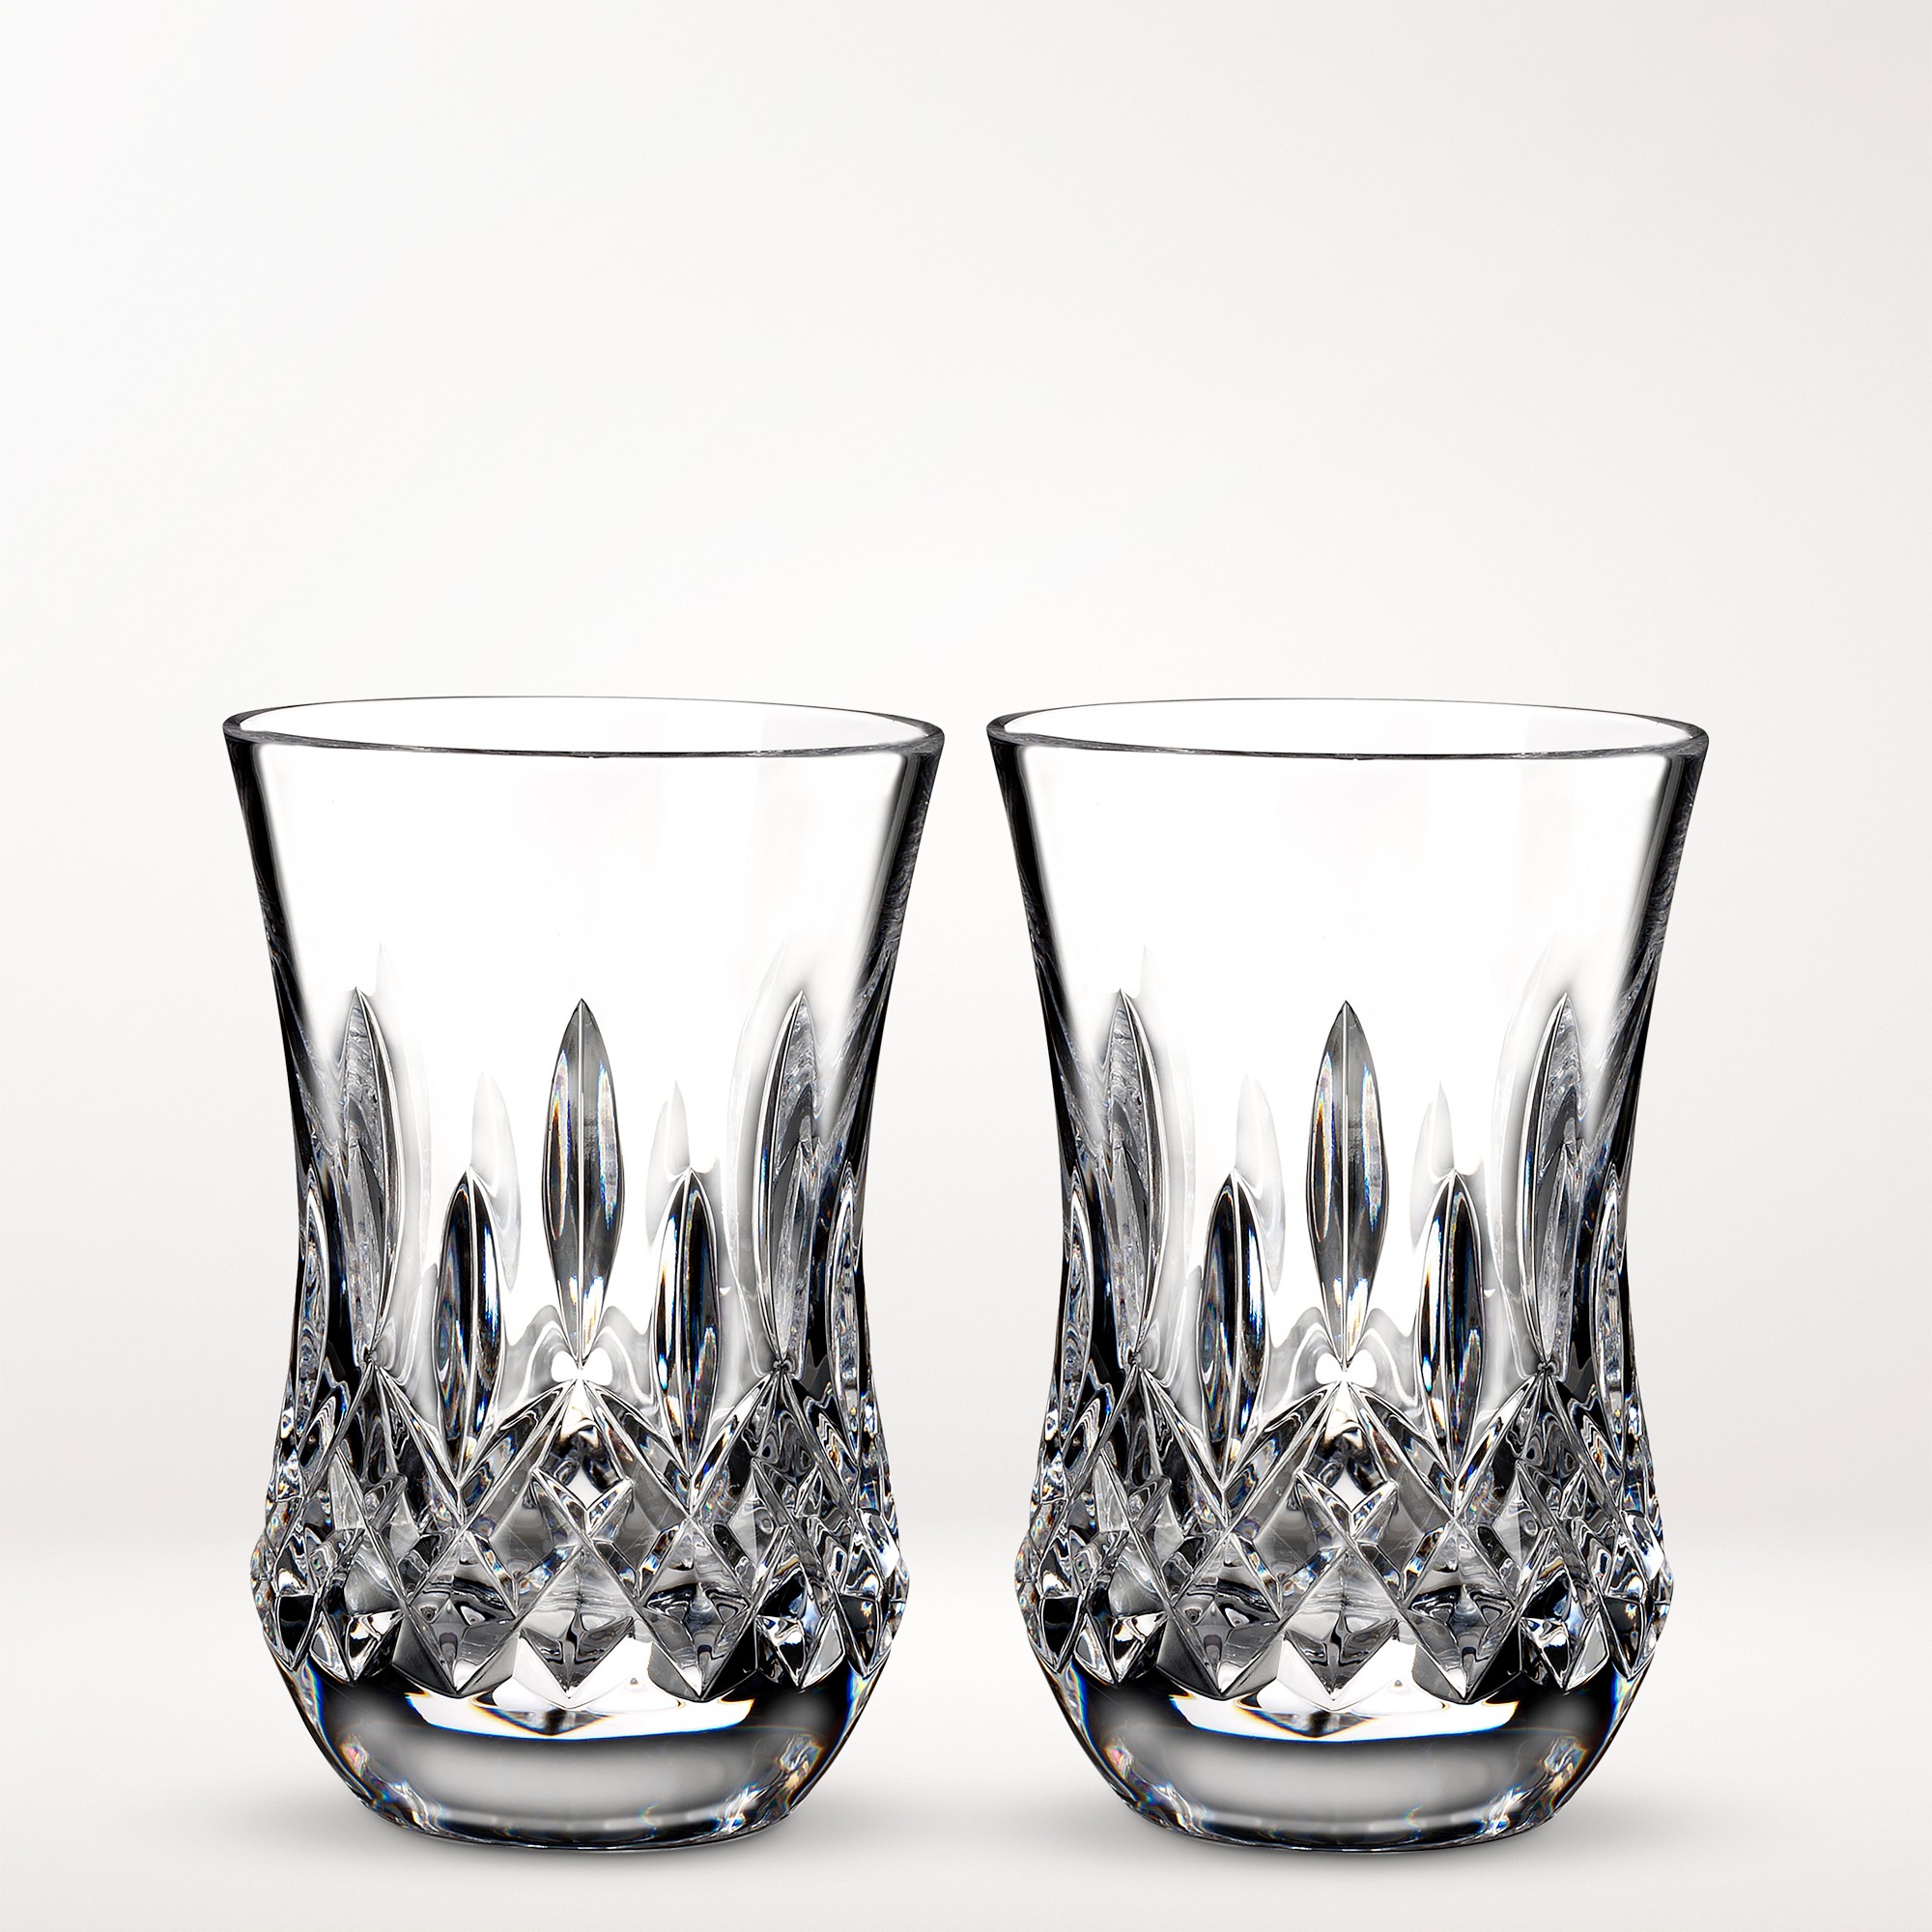 Waterford Lismore Connoisseur Flared Tumblers, Set of 2